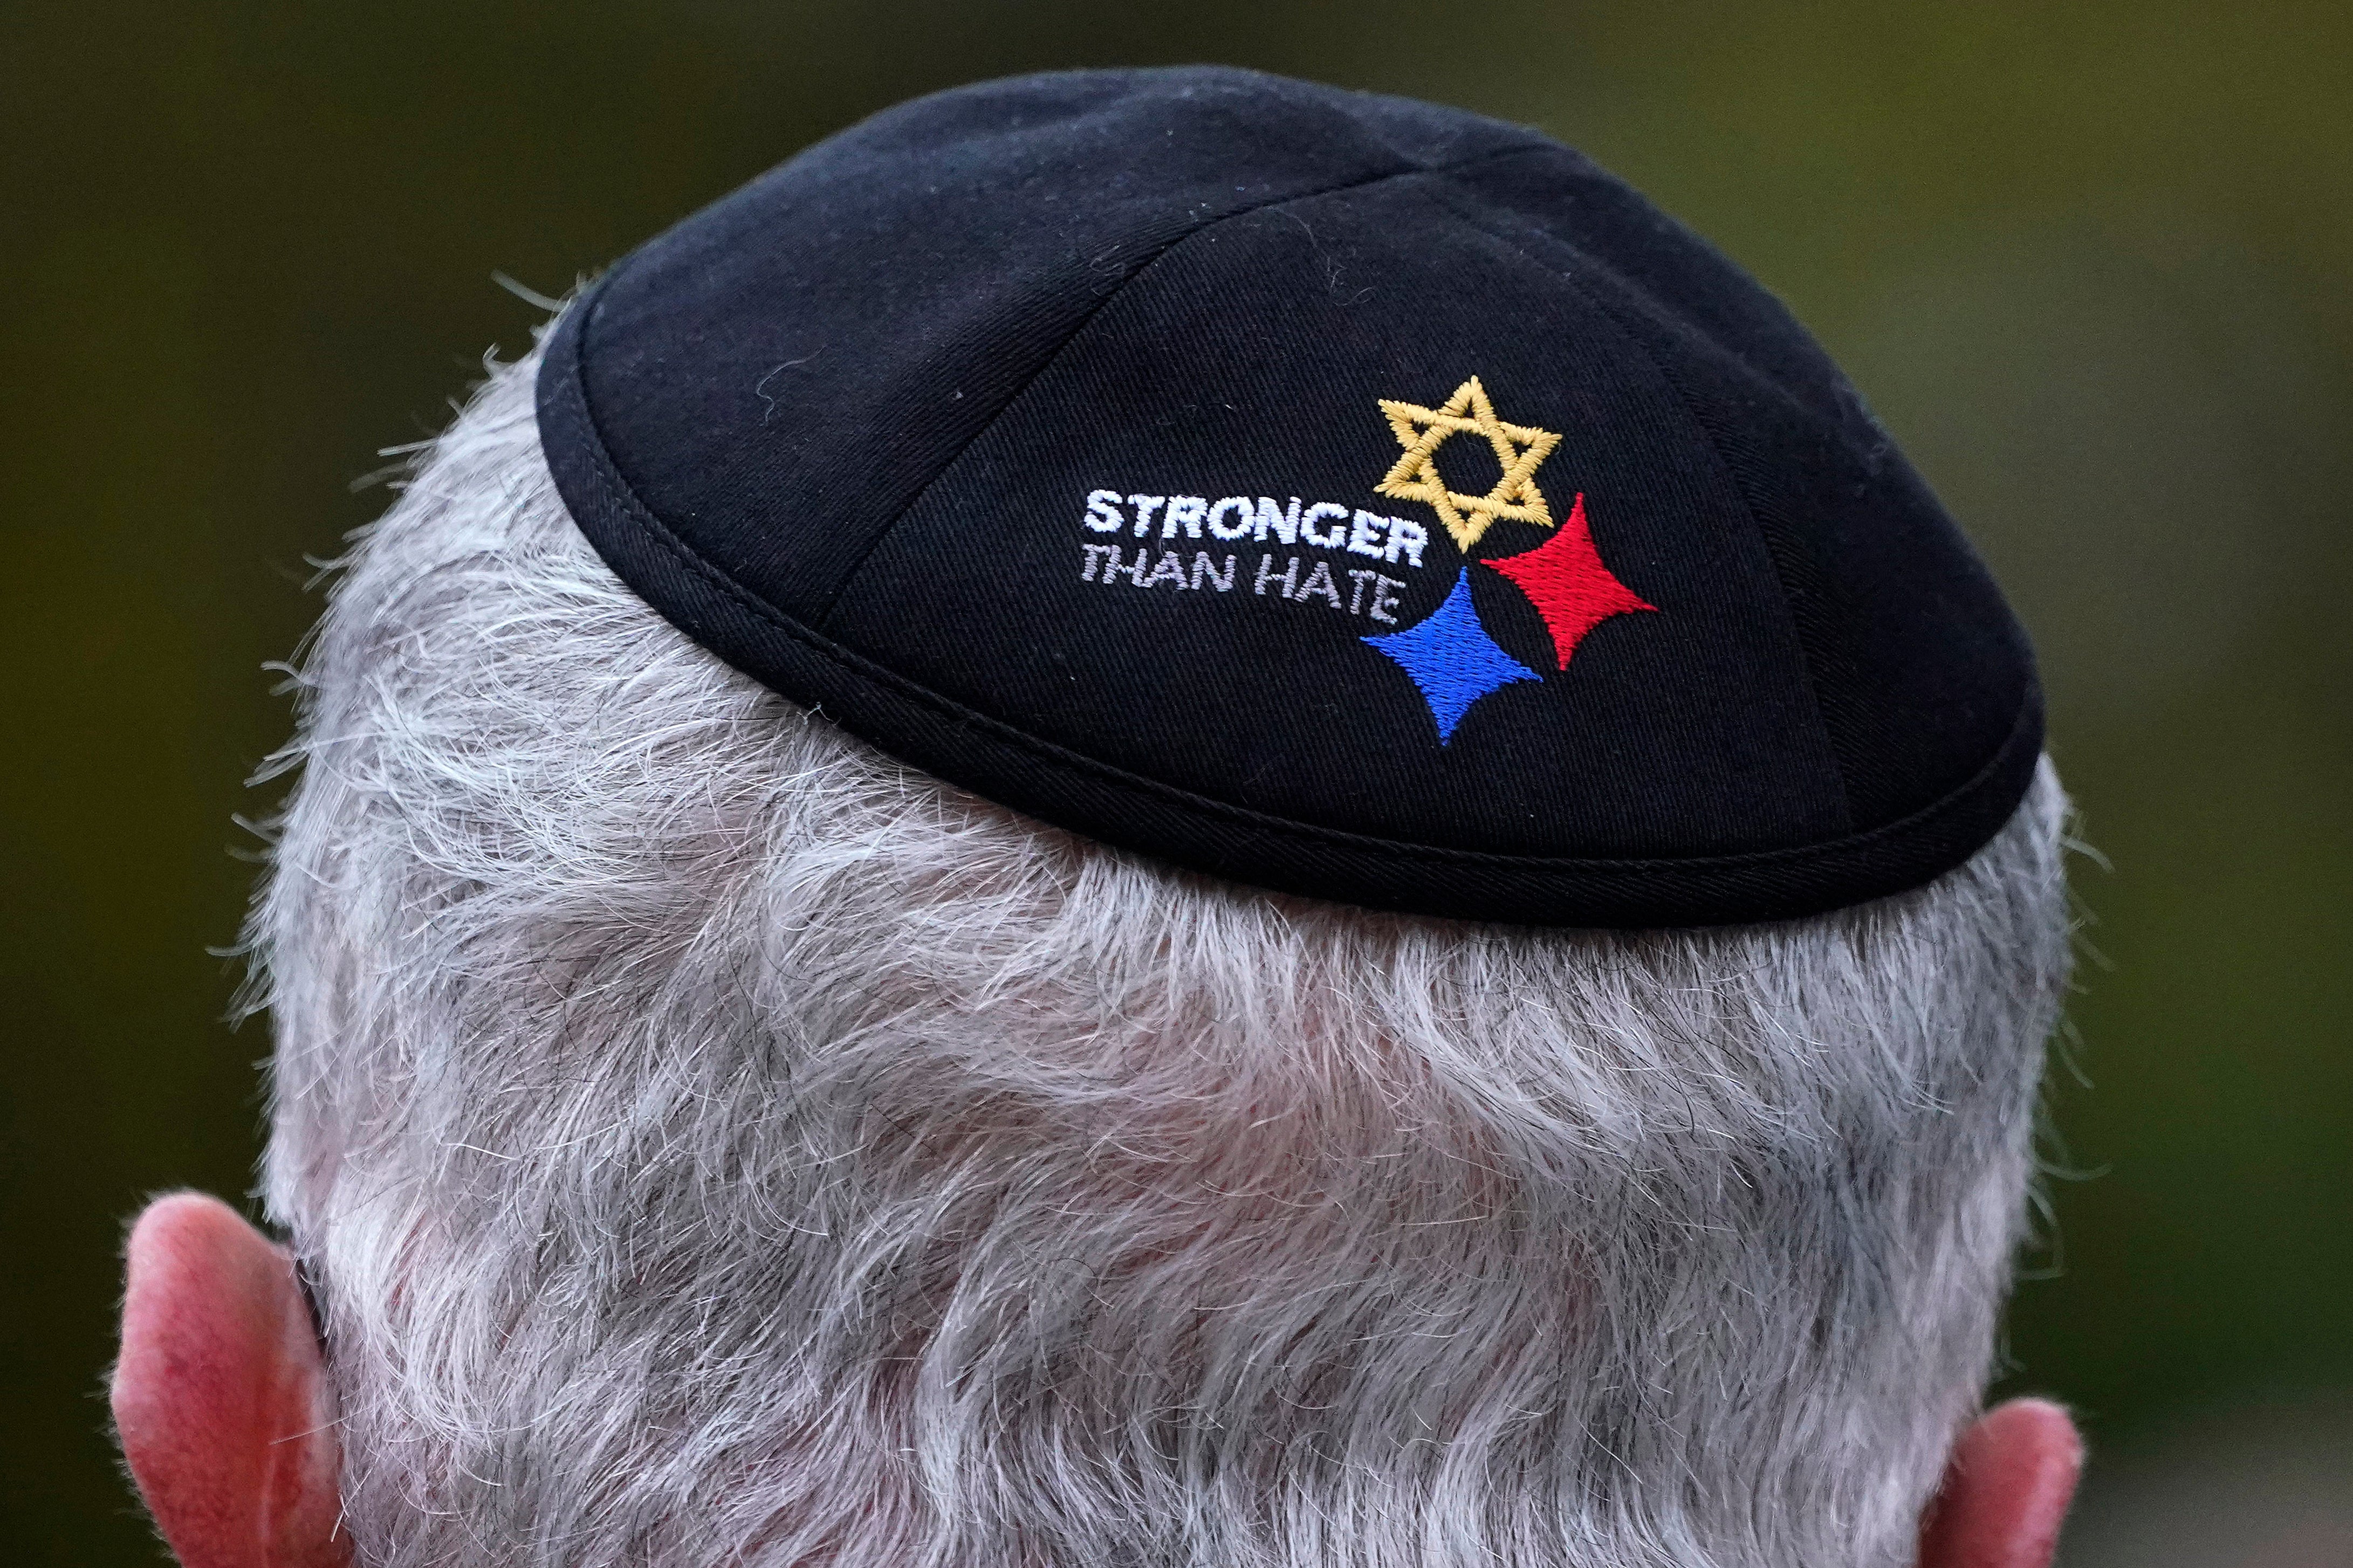 Tree of Life Synagogue Vice President Alan Hausman wears a Stronger Than Hate yarmulke during a Commemoration Ceremony in Schenley Park, in Pittsburgh's Squirrel Hill neighborhood, in 2021